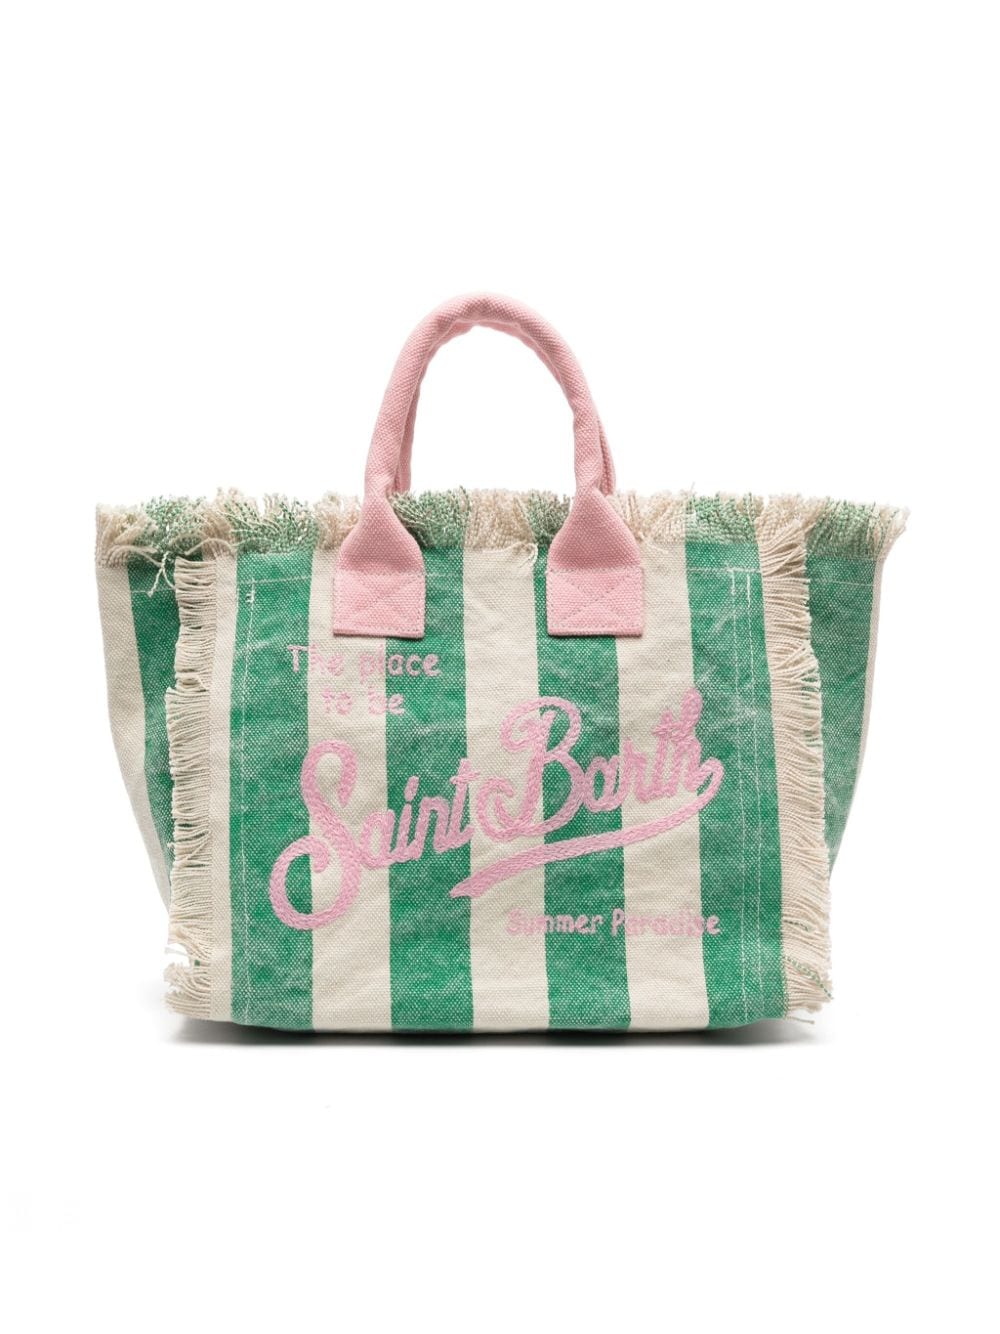 White and green beach bag for girls with logo